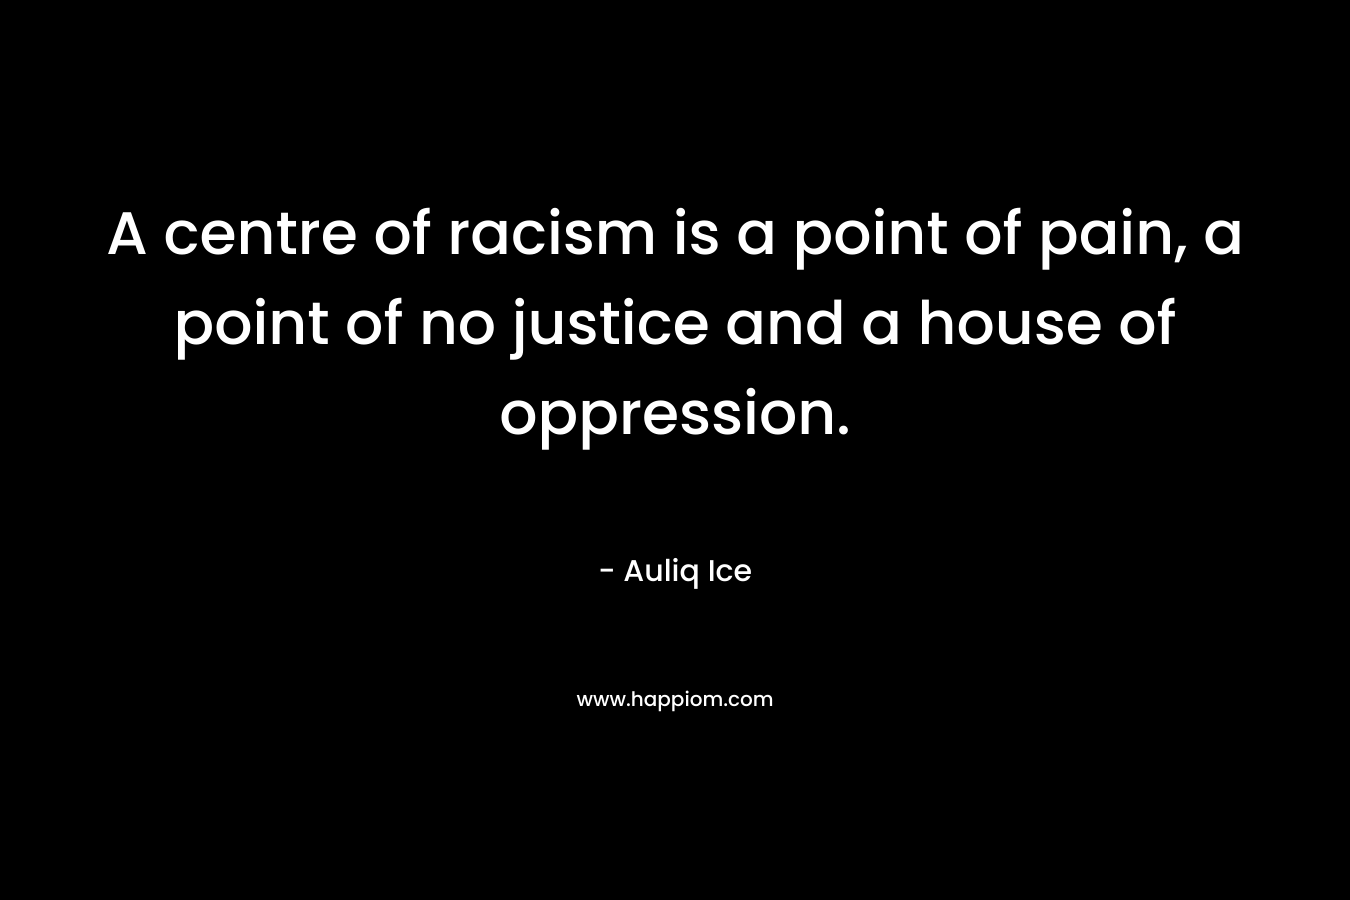 A centre of racism is a point of pain, a point of no justice and a house of oppression.